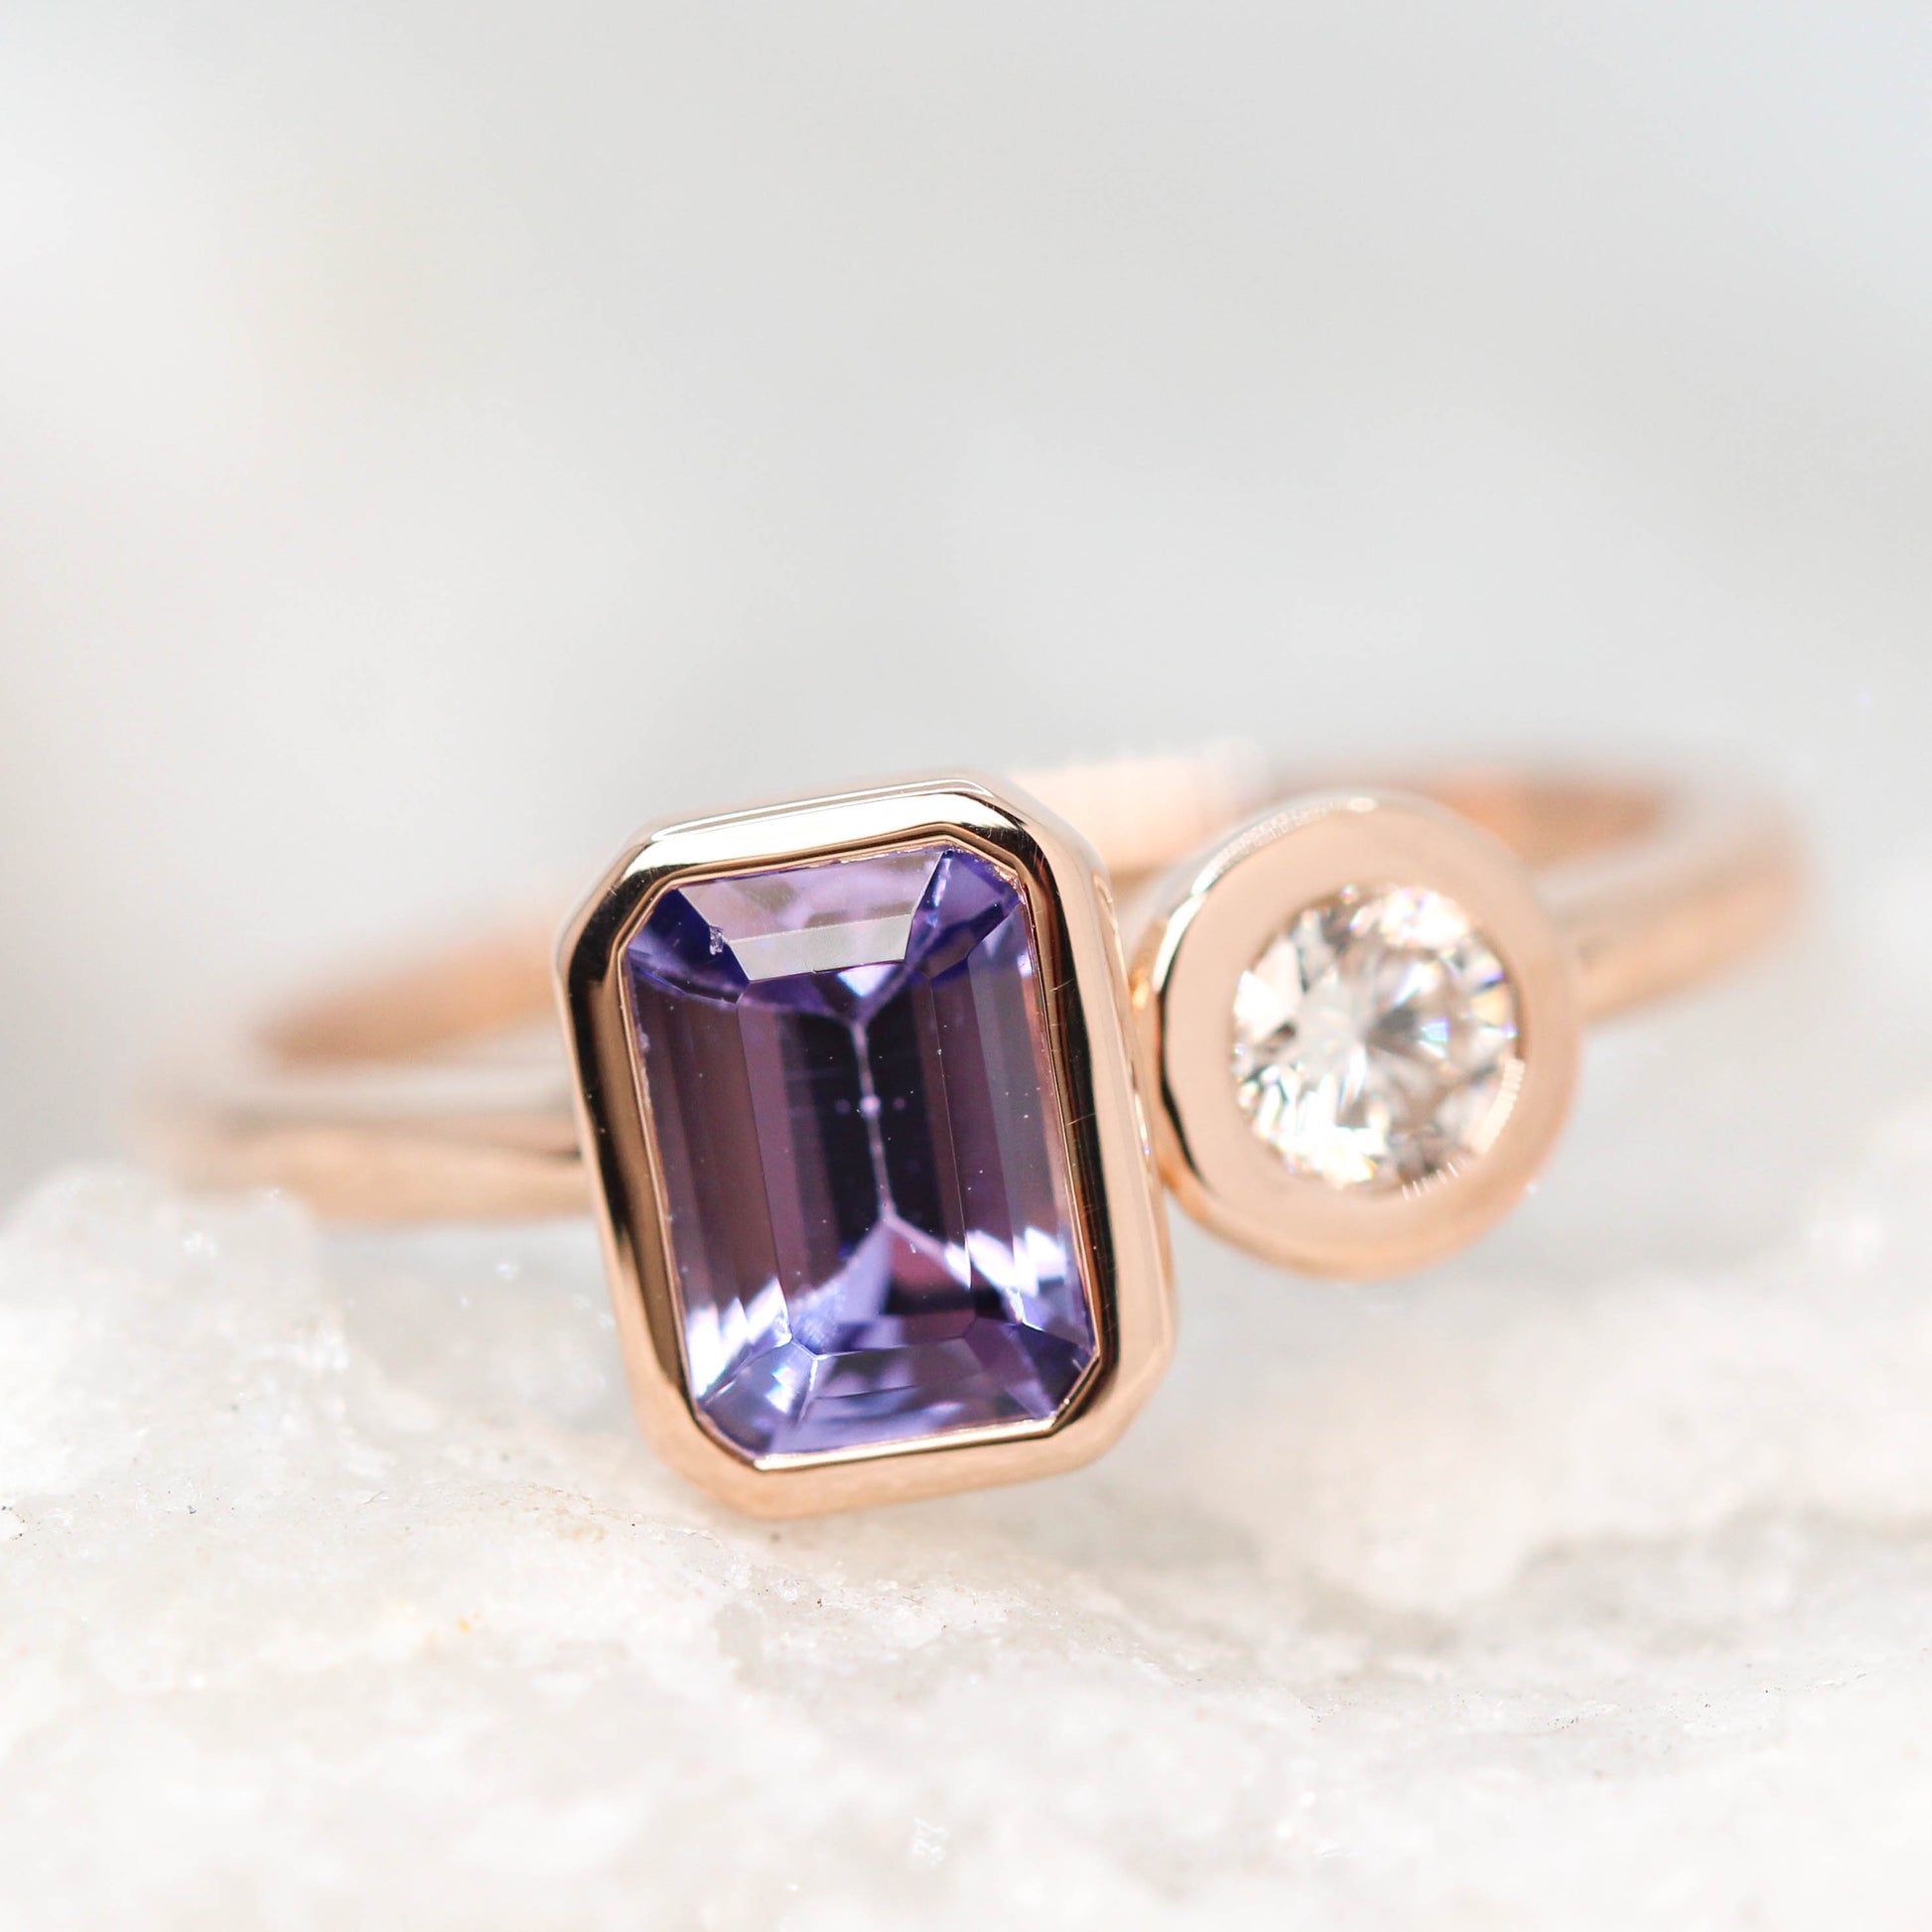 (SB) Toi et Moi Ring with an Emerald Cut Tanzanite & White Round Diamond - Made to Order, Choose Your Gold Tone - Midwinter Co. Alternative Bridal Rings and Modern Fine Jewelry